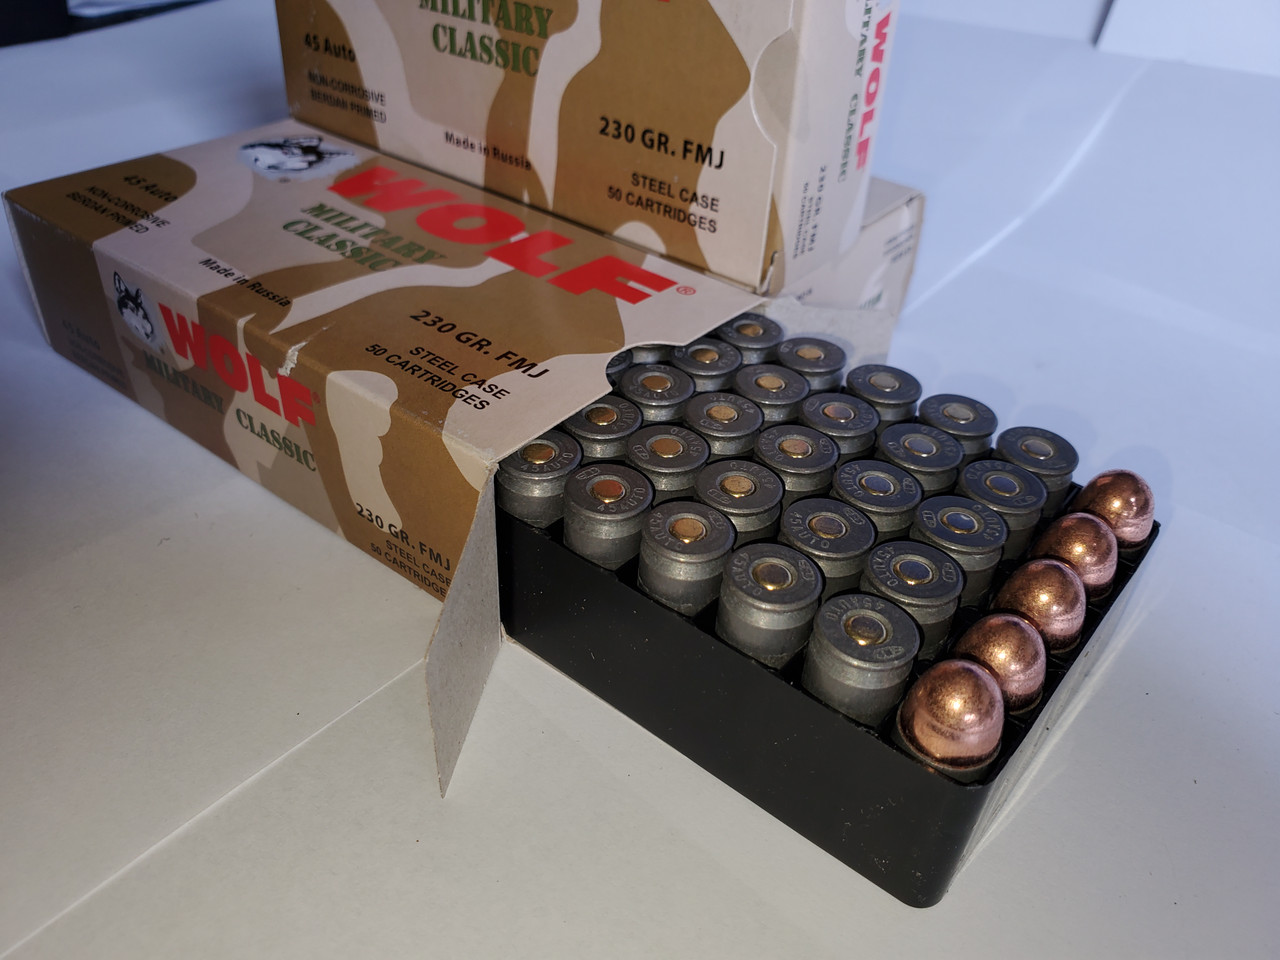 45 ACP Ammo 230gr FMJ Wolf WPA Military Classic 100 Rounds